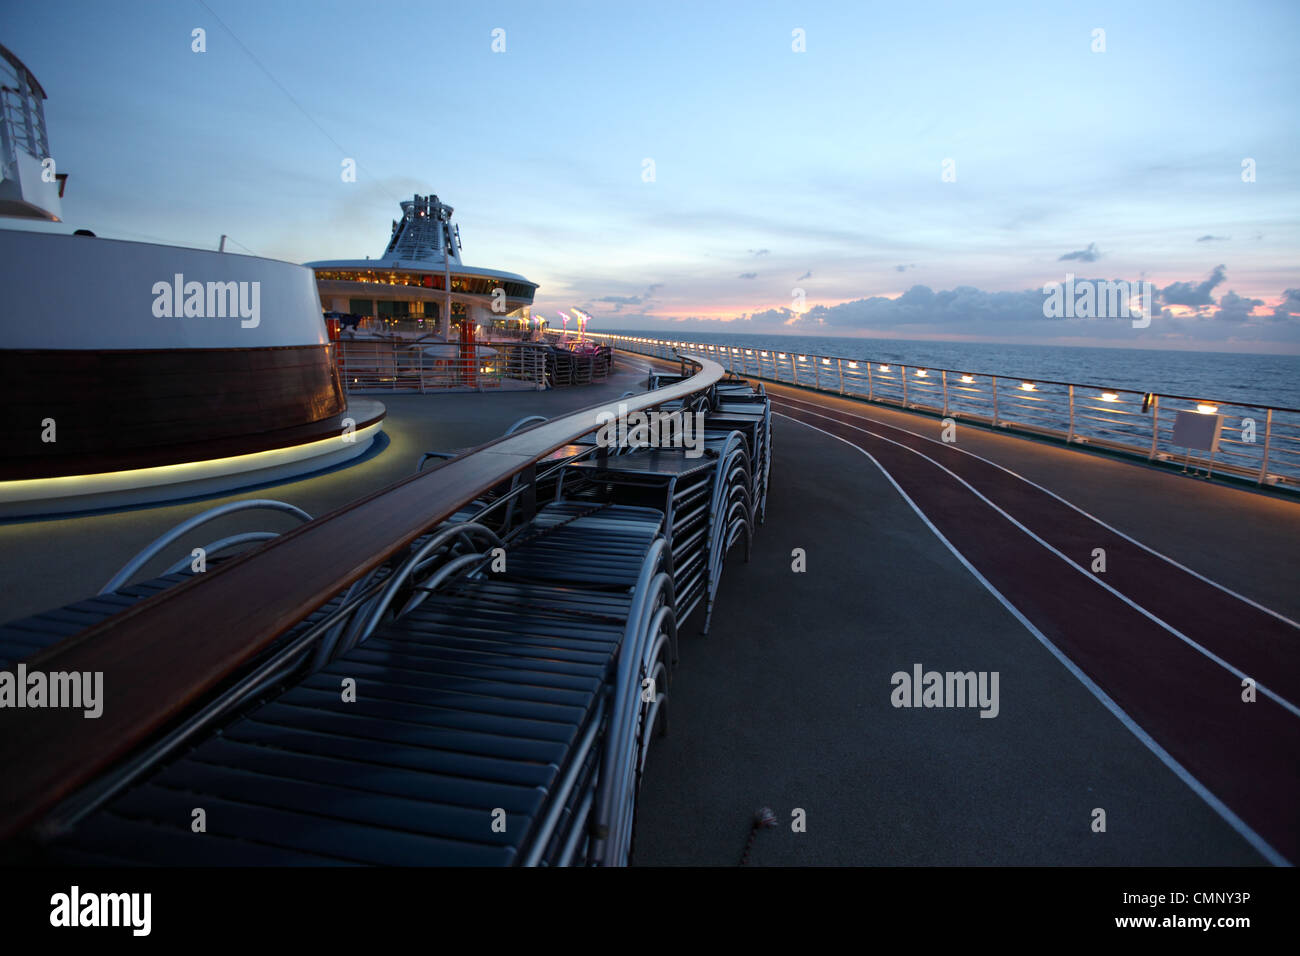 Top deck of large cruise liner, independence of the seas, Royal Caribbean lines with sunset in background Stock Photo